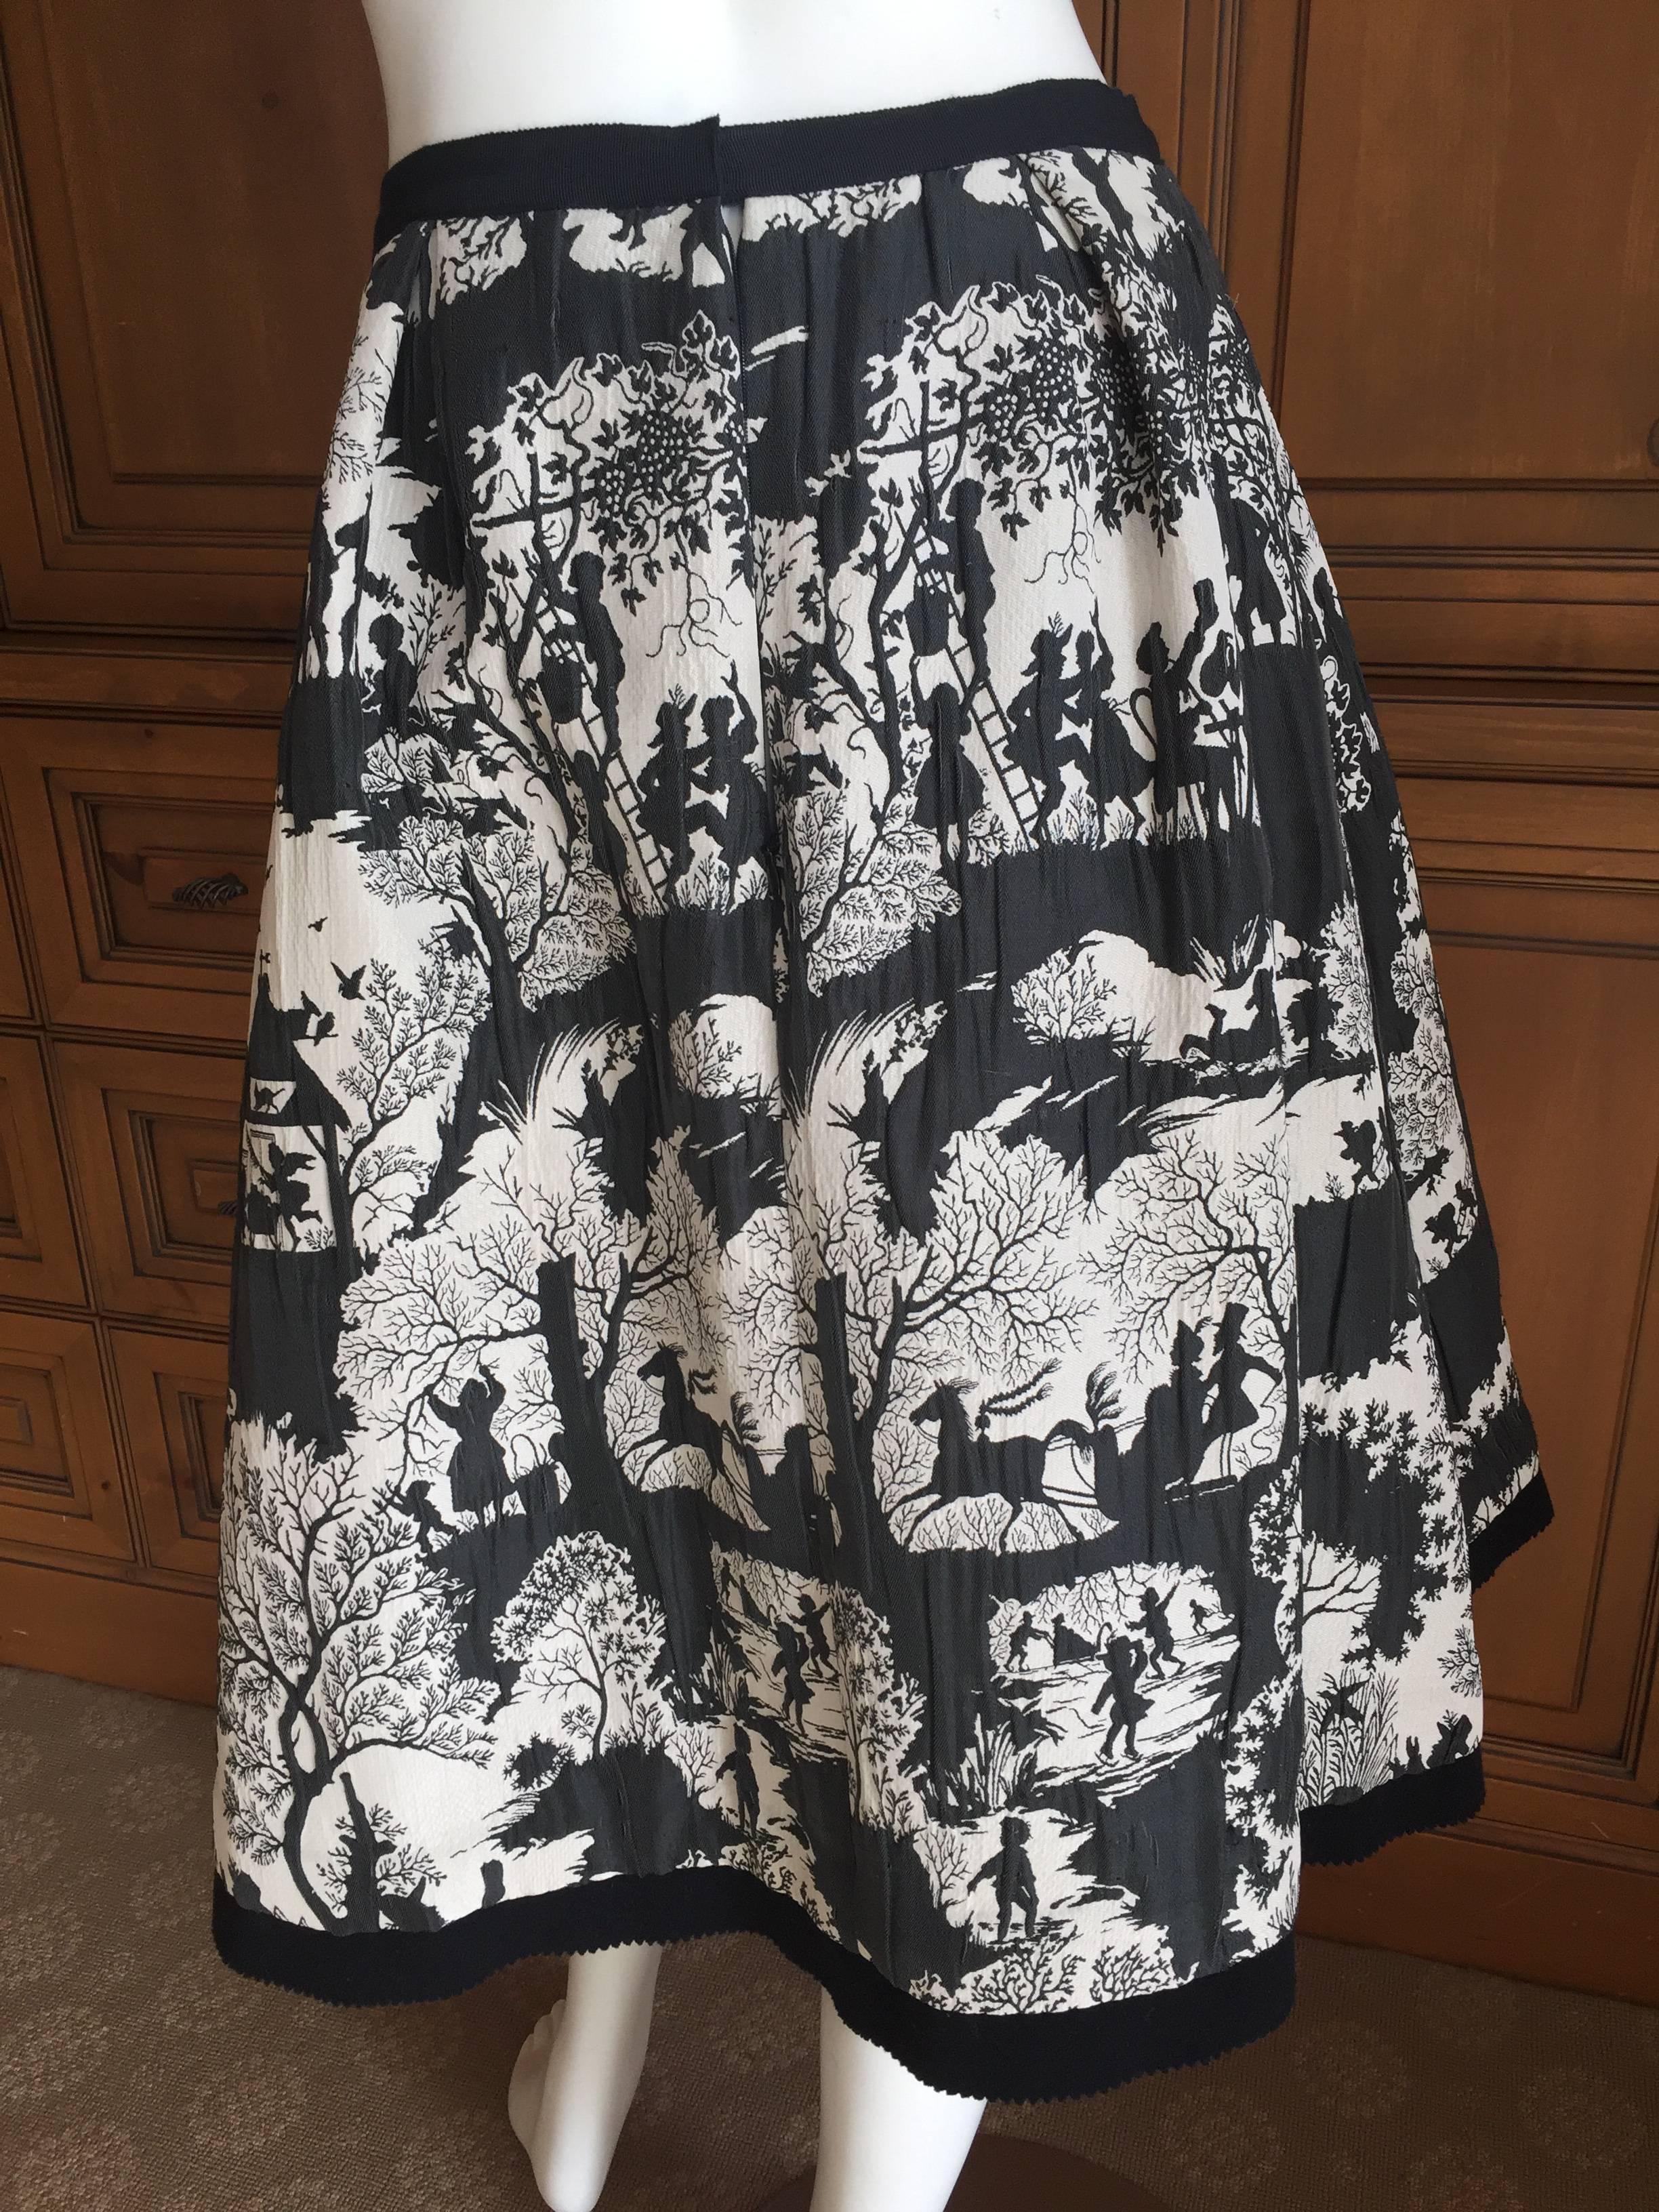 Wonderful black and gray Toile pattern skirt from Oscar de la Renta .
This was created for the Fall 2013 collection, when John Galliano was brought in as a creative consultant. 
Size 6